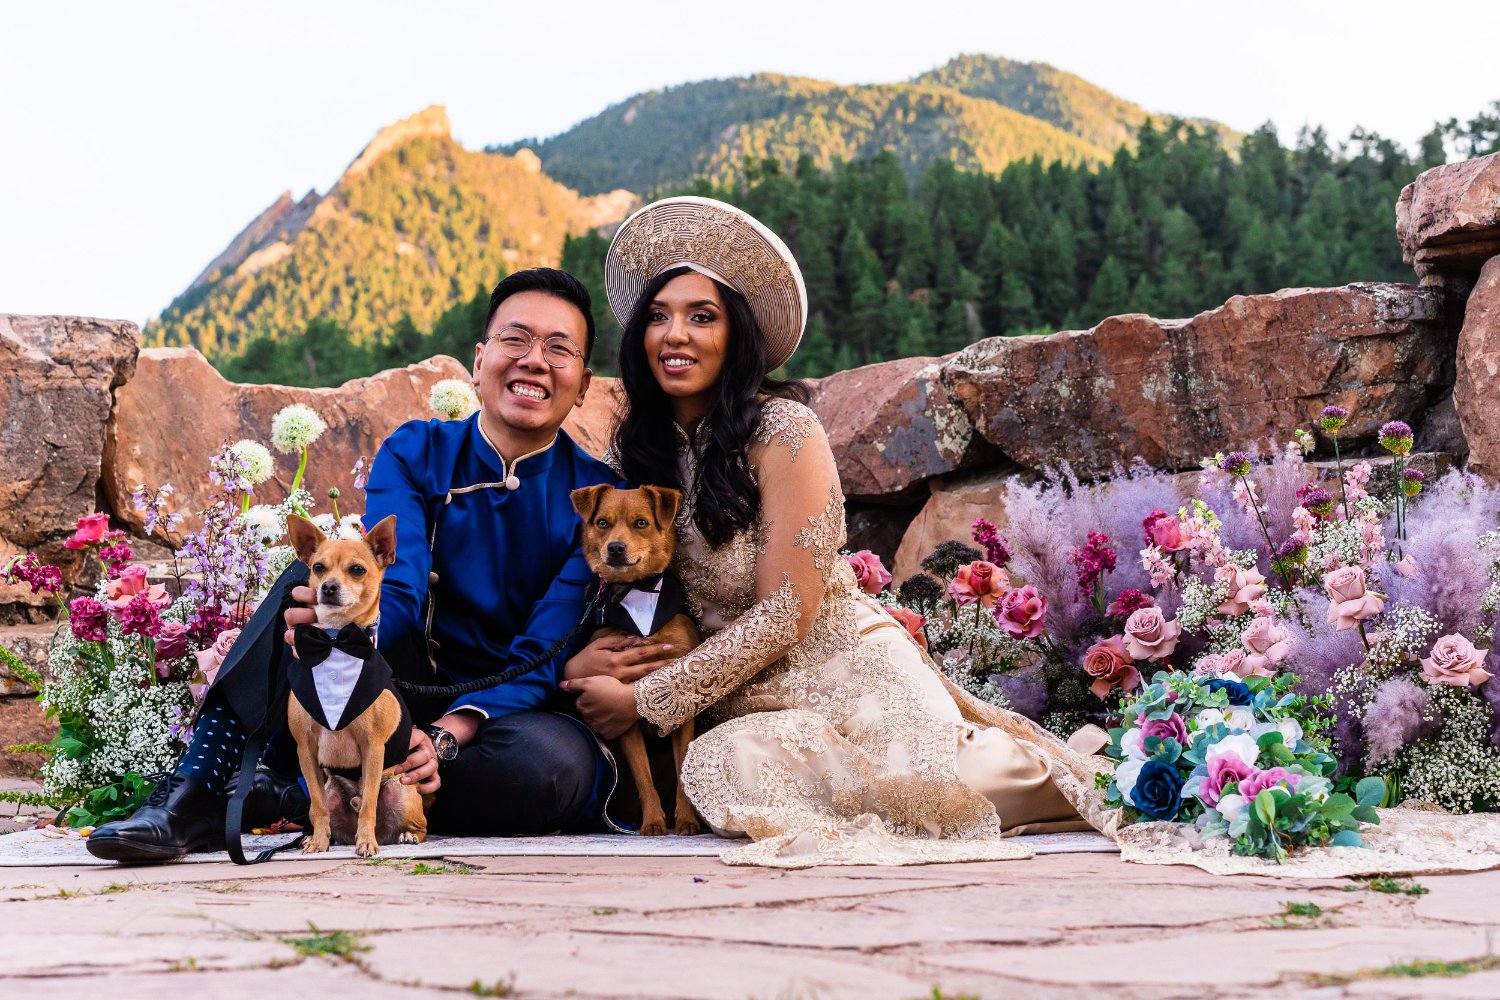 A bride and groom elopement photos with their dogs in front of a mountain.